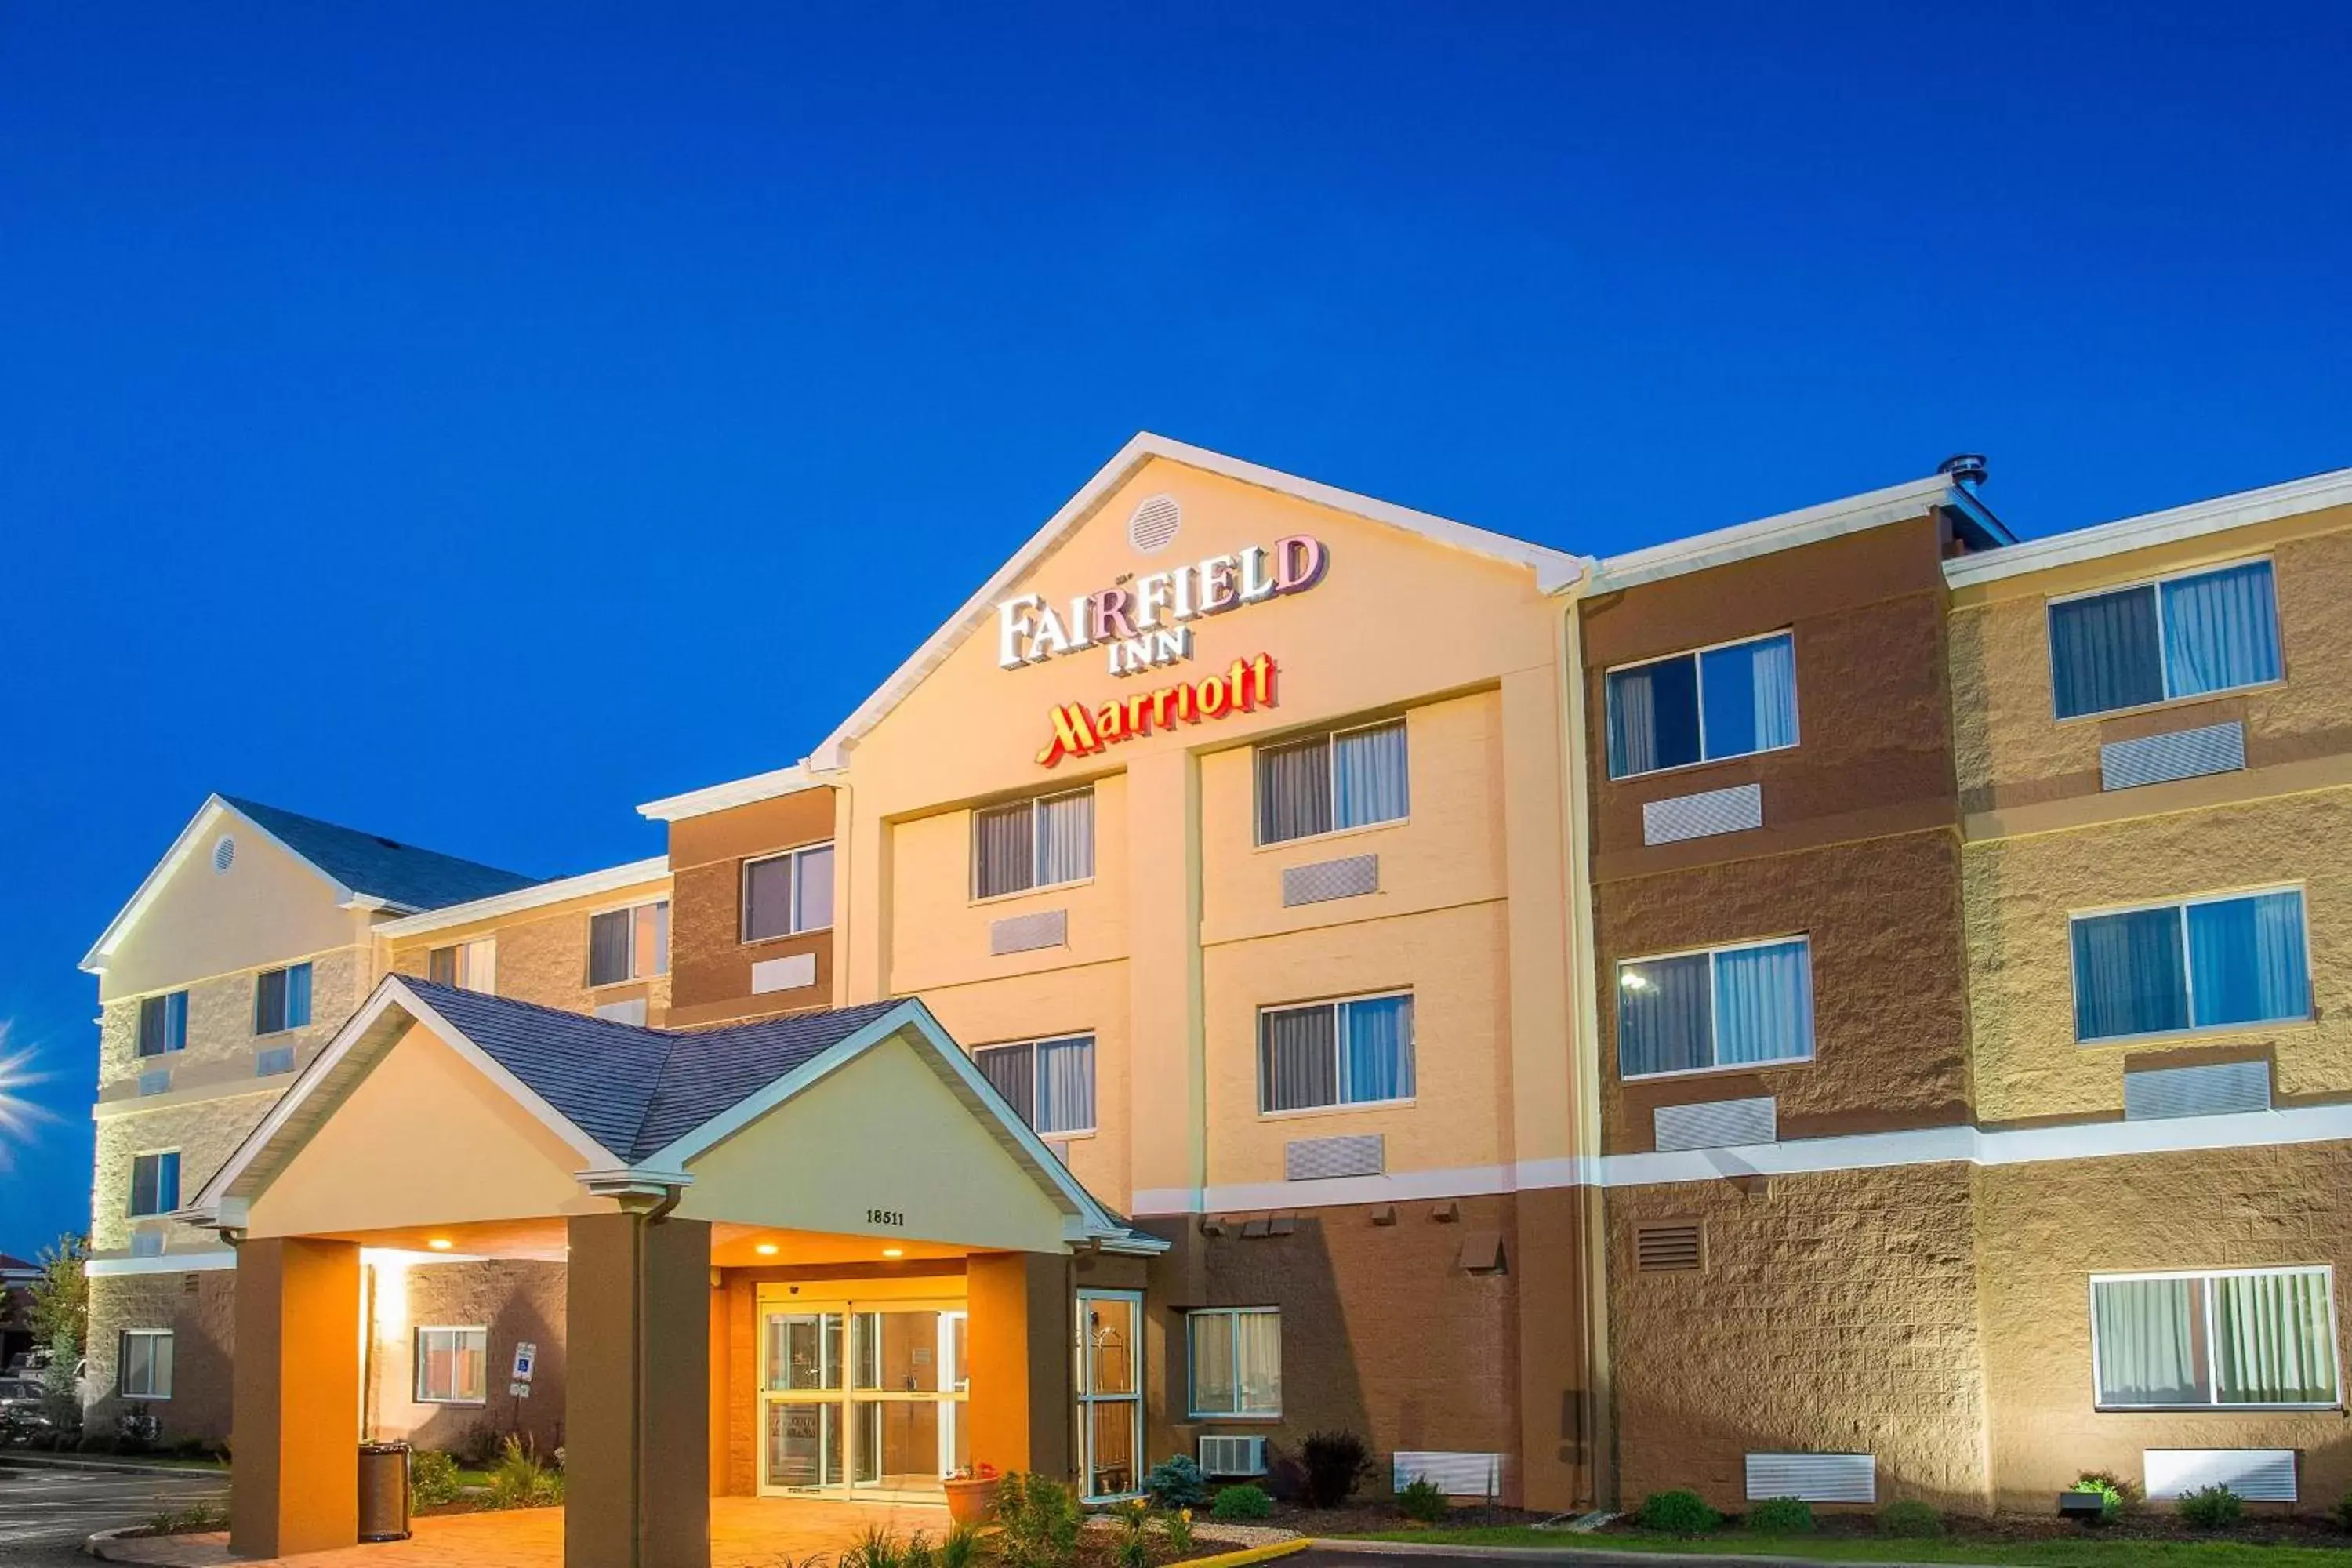 Property Building in Fairfield Inn & Suites Chicago Tinley Park